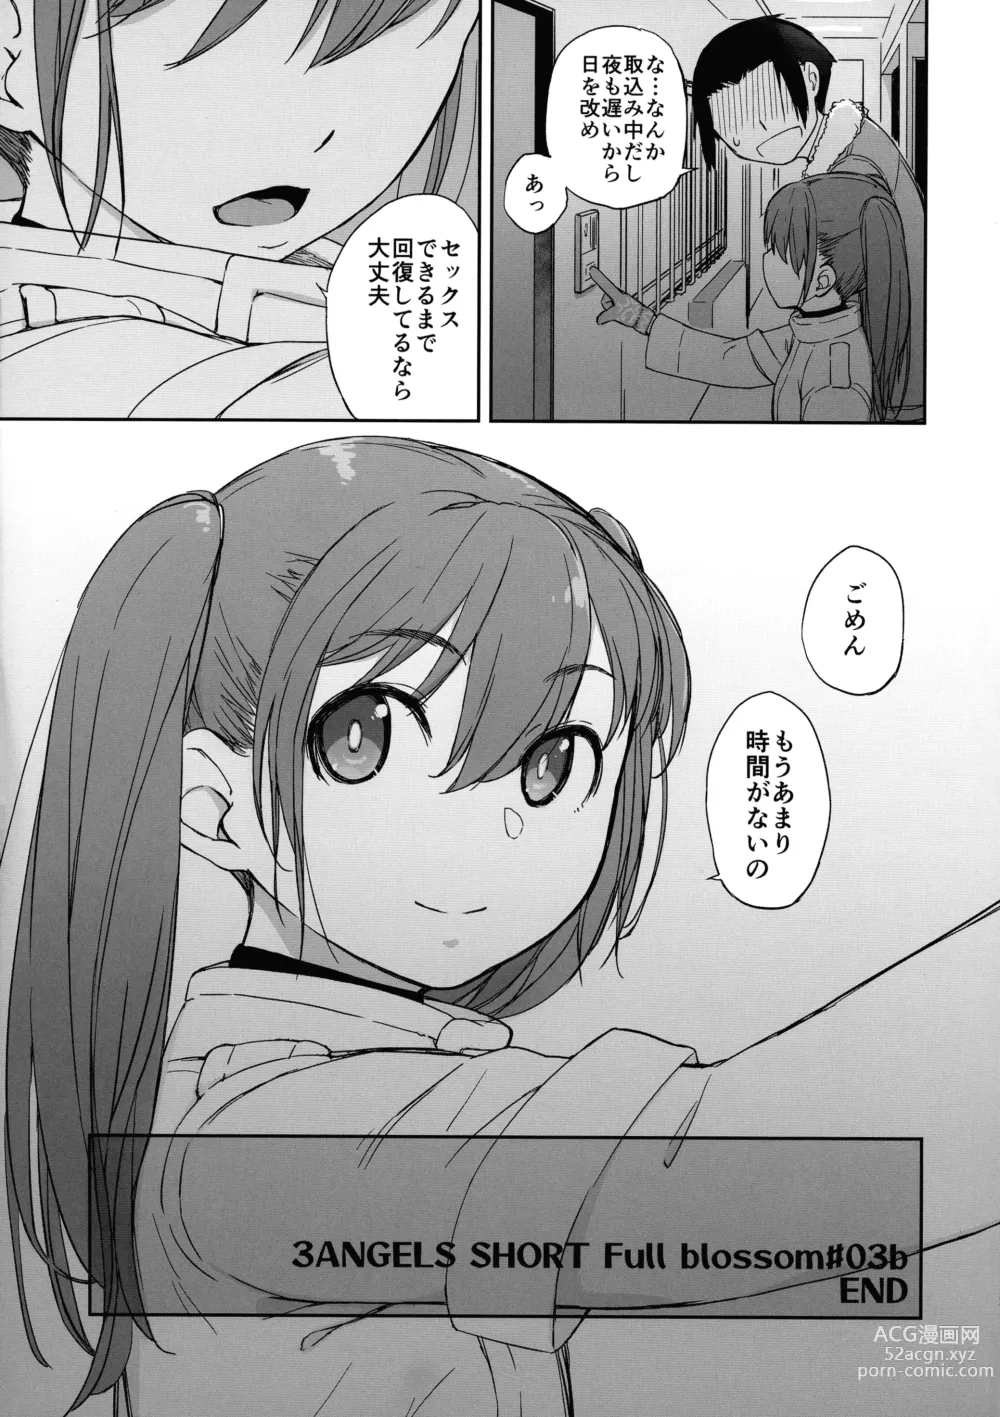 Page 20 of doujinshi 3ANGELS SHORT Full blossom ＃03b “HOME II”